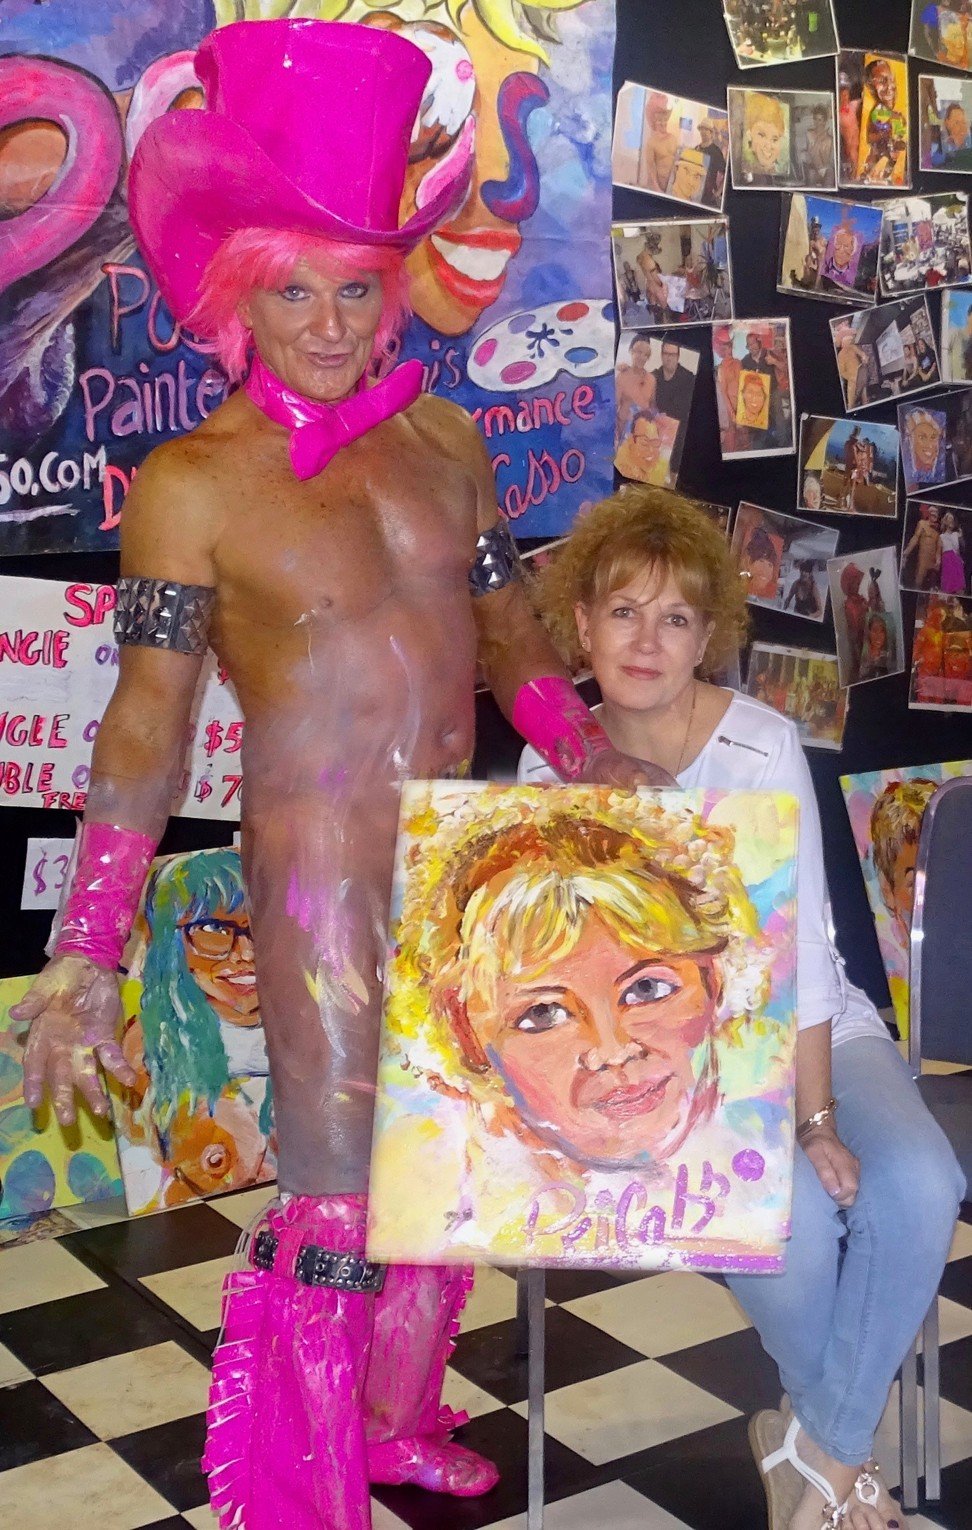 Australian artist Pricasso and one of his works.